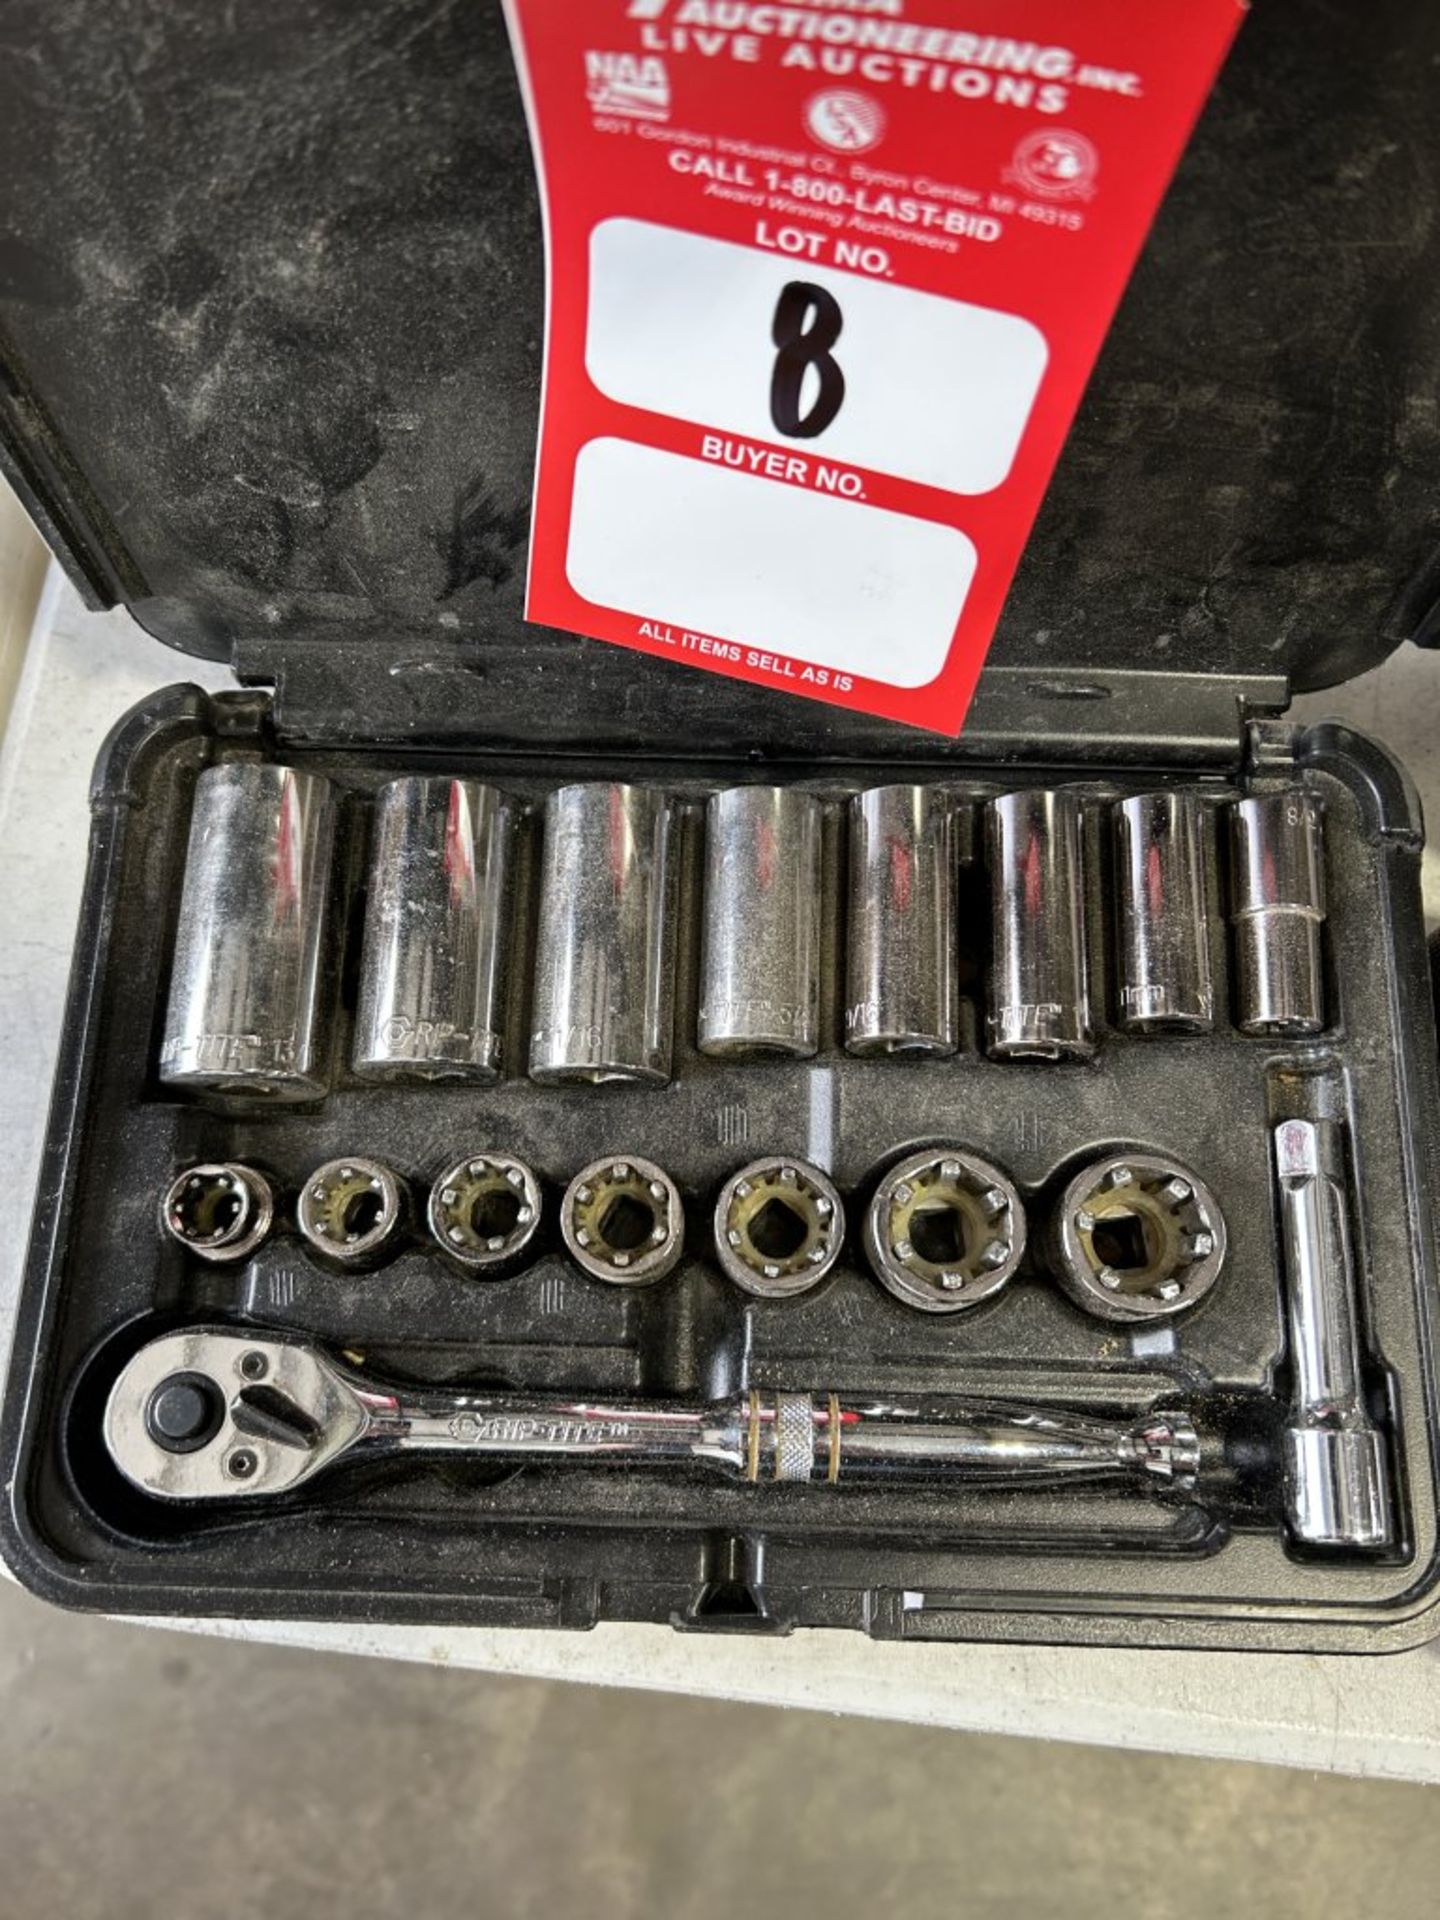 ASSORTED SOCKET SETS, WRENCHES, SUPER SOCKETS, ETC. - Image 3 of 7